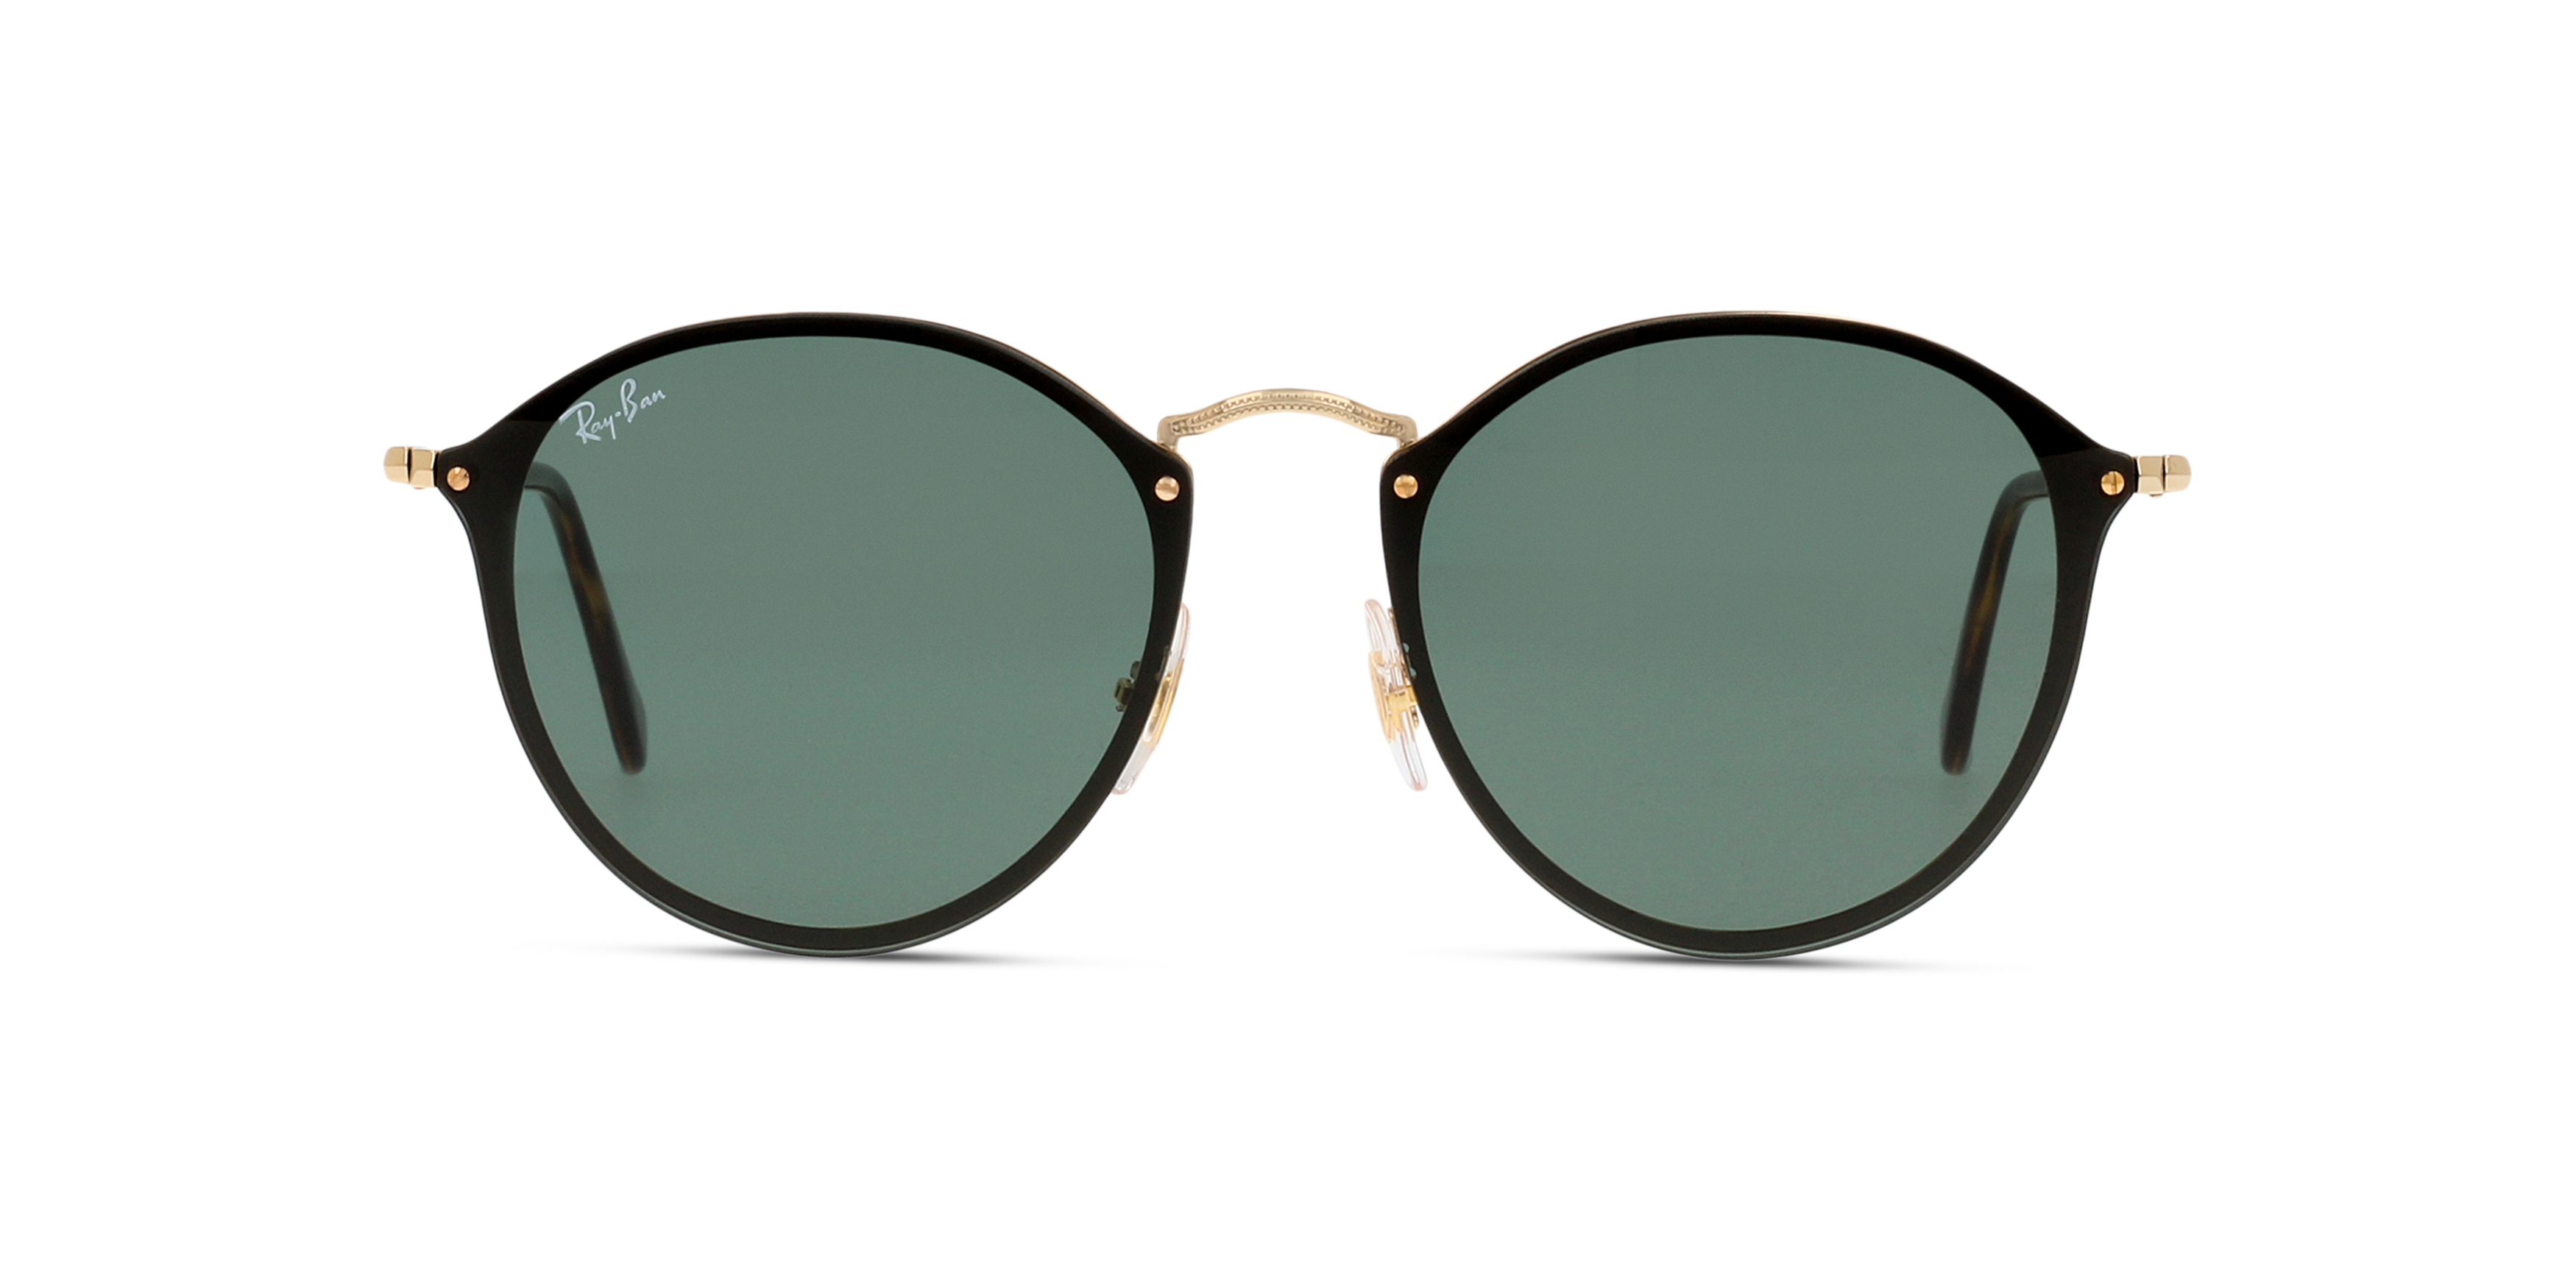 [products.image.front] RAY-BAN RB3574N 001/71